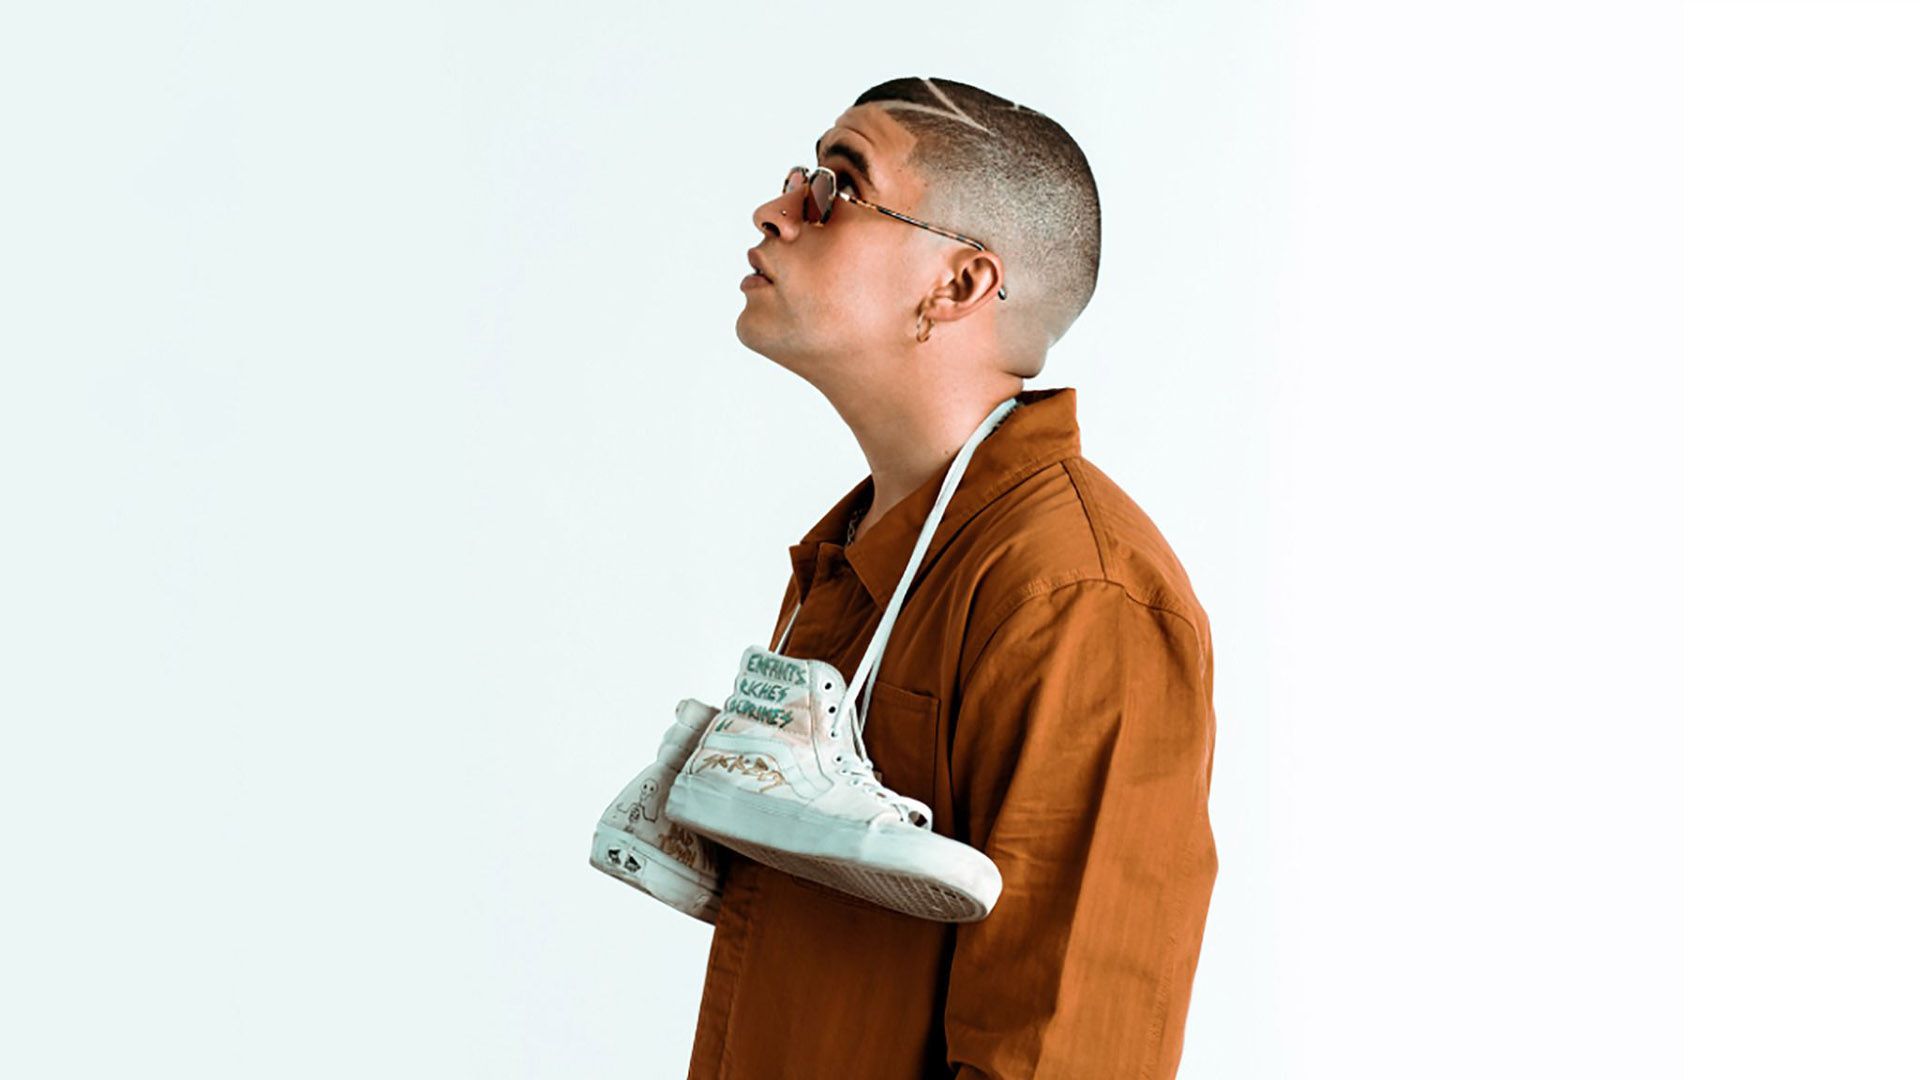 Bad Bunny Aesthetic With Hanging Shoes On Neck Looking Up Wearing Brown Coat In White Background HD Music Wallpaper